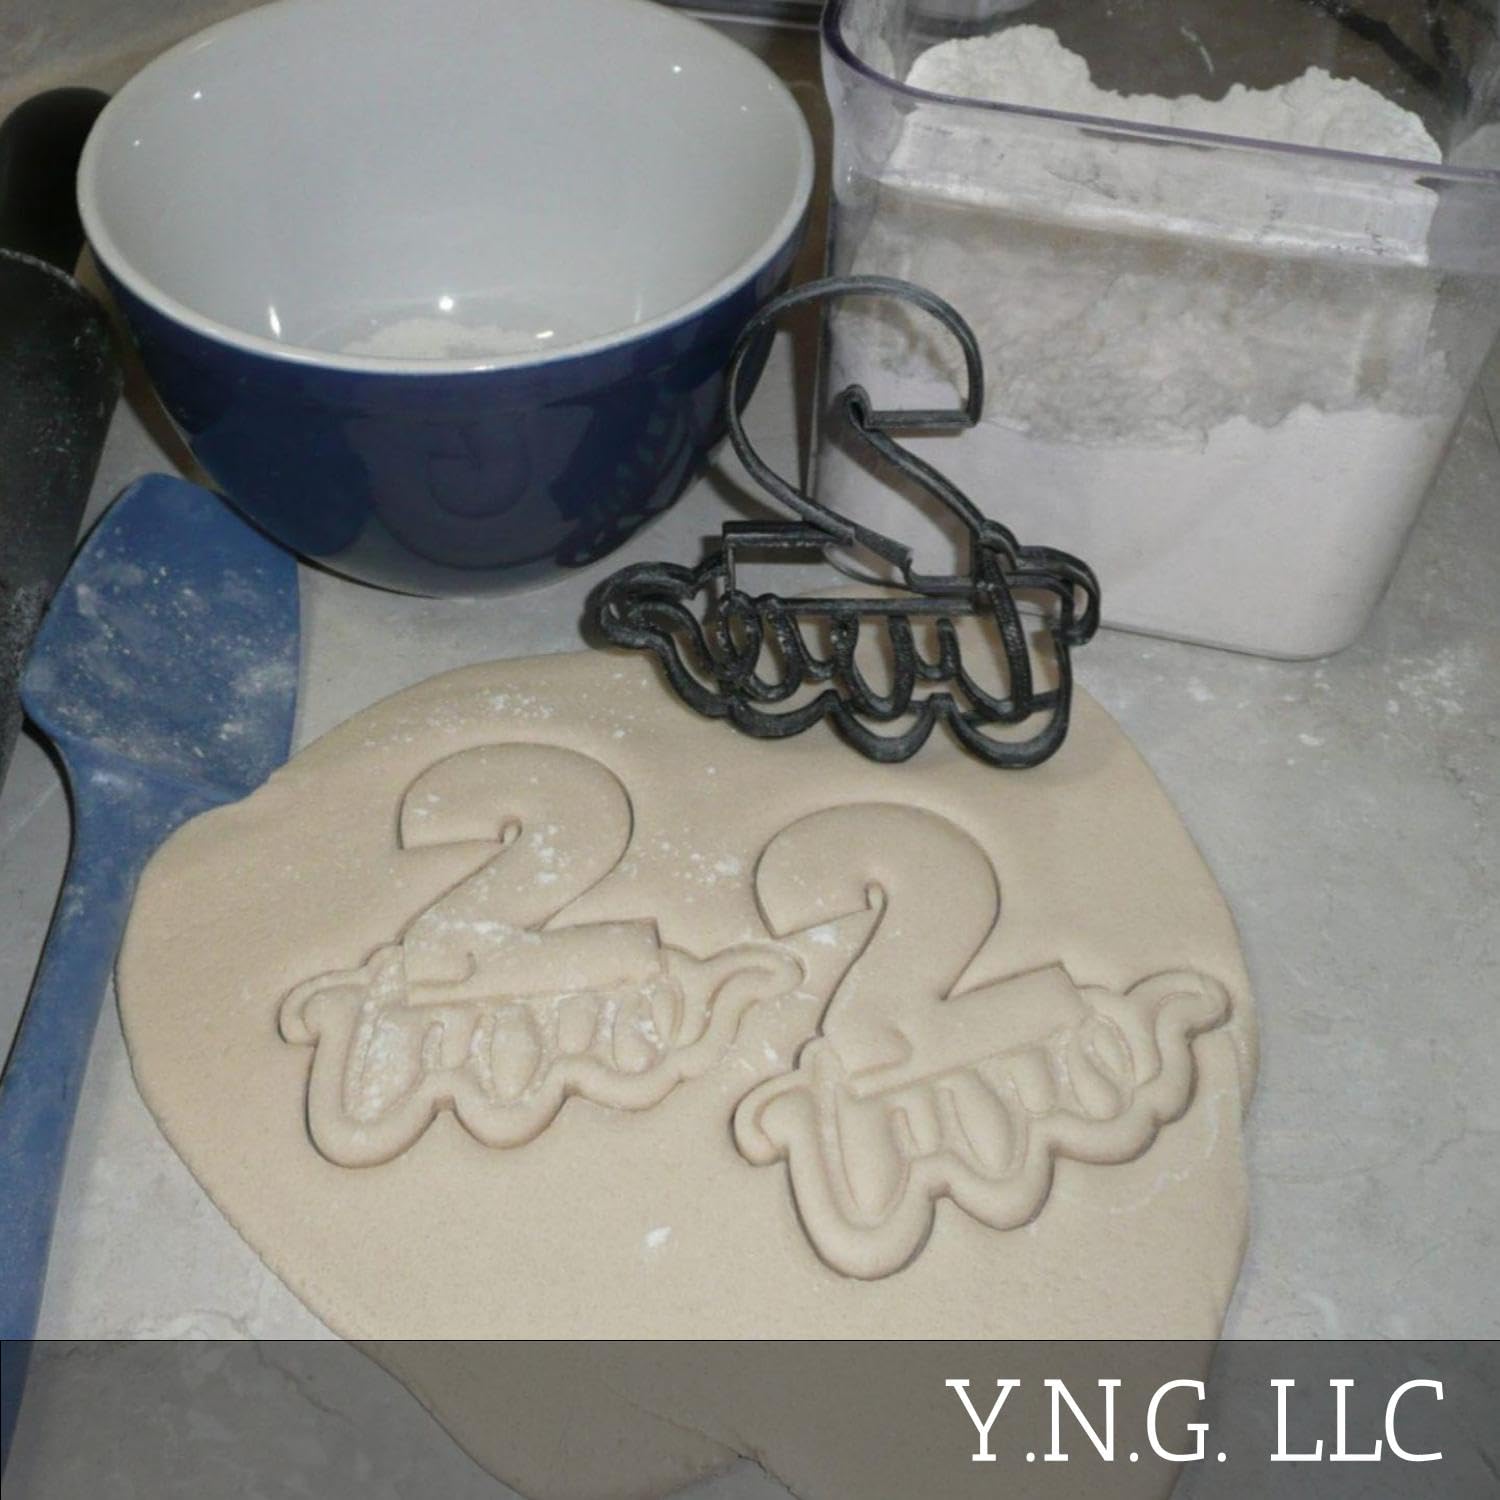 NUMBER 2 WITH WORD BIRTHDAY ANNIVERSARY PARTY AGE DATE DETAILED COOKIE CUTTER MADE IN USA PR2403